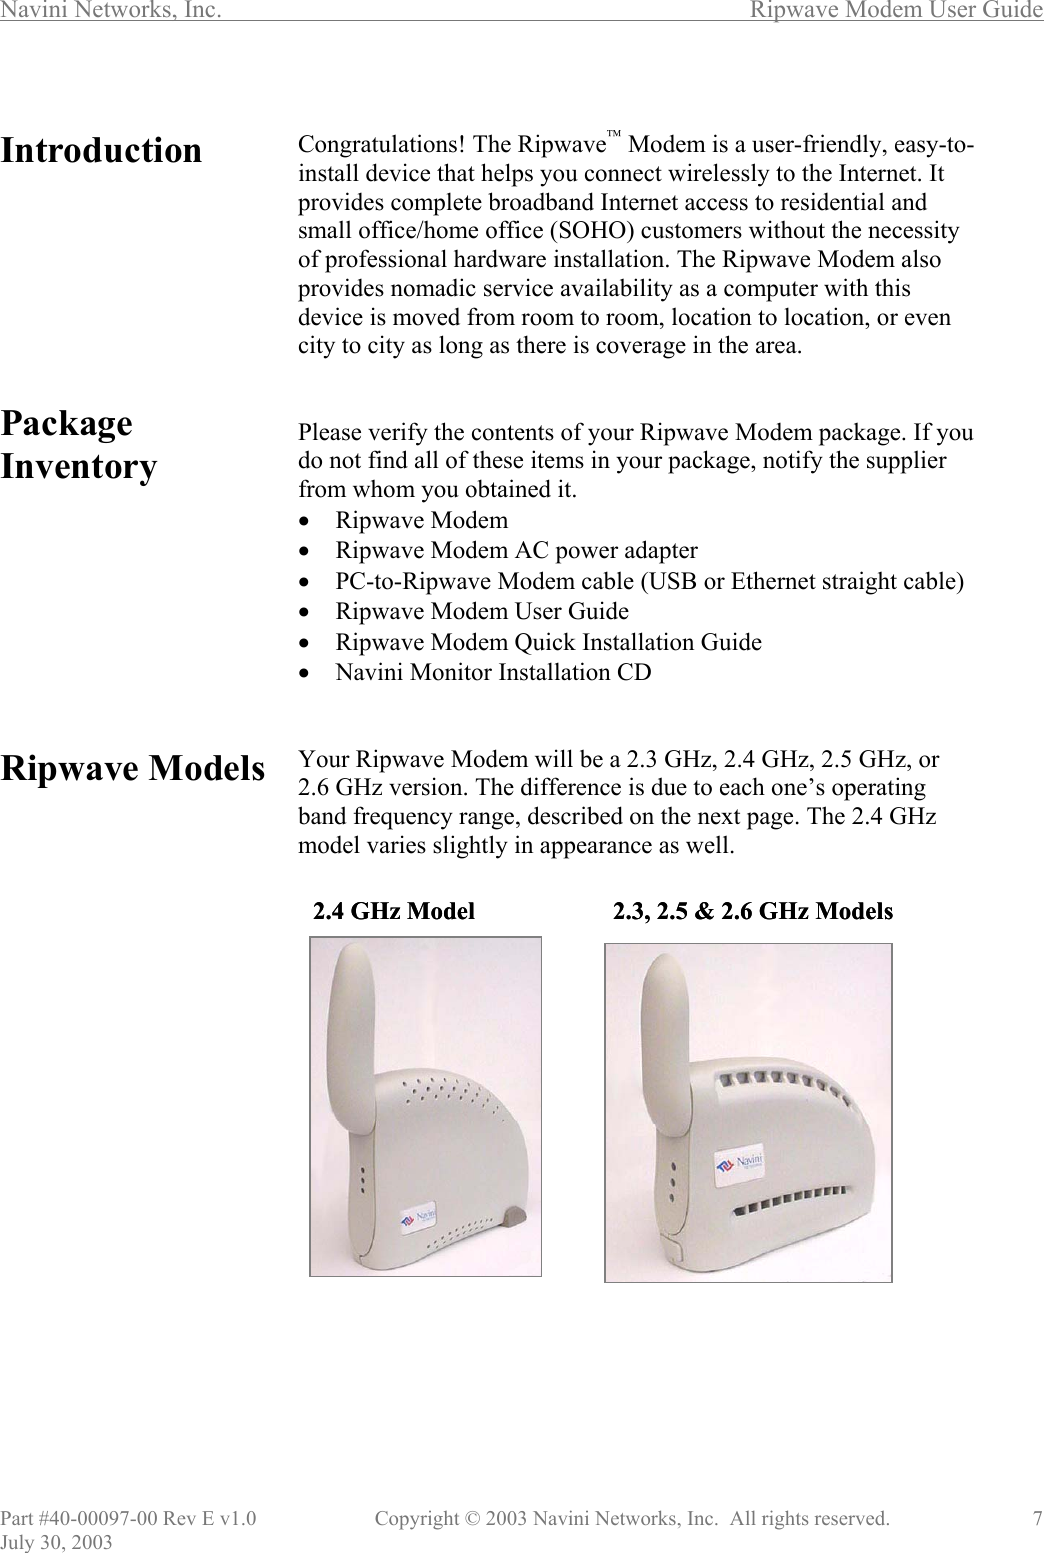 Navini Networks, Inc.        Ripwave Modem User Guide Part #40-00097-00 Rev E v1.0    Copyright © 2003 Navini Networks, Inc.  All rights reserved.               7 July 30, 2003  Introduction         Package Inventory          Ripwave Models                        Congratulations! The Ripwave Modem is a user-friendly, easy-to-install device that helps you connect wirelessly to the Internet. It provides complete broadband Internet access to residential and small office/home office (SOHO) customers without the necessity of professional hardware installation. The Ripwave Modem also provides nomadic service availability as a computer with this device is moved from room to room, location to location, or even city to city as long as there is coverage in the area.   Please verify the contents of your Ripwave Modem package. If you do not find all of these items in your package, notify the supplier from whom you obtained it. •  Ripwave Modem •  Ripwave Modem AC power adapter •  PC-to-Ripwave Modem cable (USB or Ethernet straight cable) •  Ripwave Modem User Guide •  Ripwave Modem Quick Installation Guide •  Navini Monitor Installation CD   Your Ripwave Modem will be a 2.3 GHz, 2.4 GHz, 2.5 GHz, or 2.6 GHz version. The difference is due to each one’s operating band frequency range, described on the next page. The 2.4 GHz model varies slightly in appearance as well.                      2.4 GHz Model 2.3, 2.5 &amp; 2.6 GHz Models 2.4 GHz Model 2.3, 2.5 &amp; 2.6 GHz Models